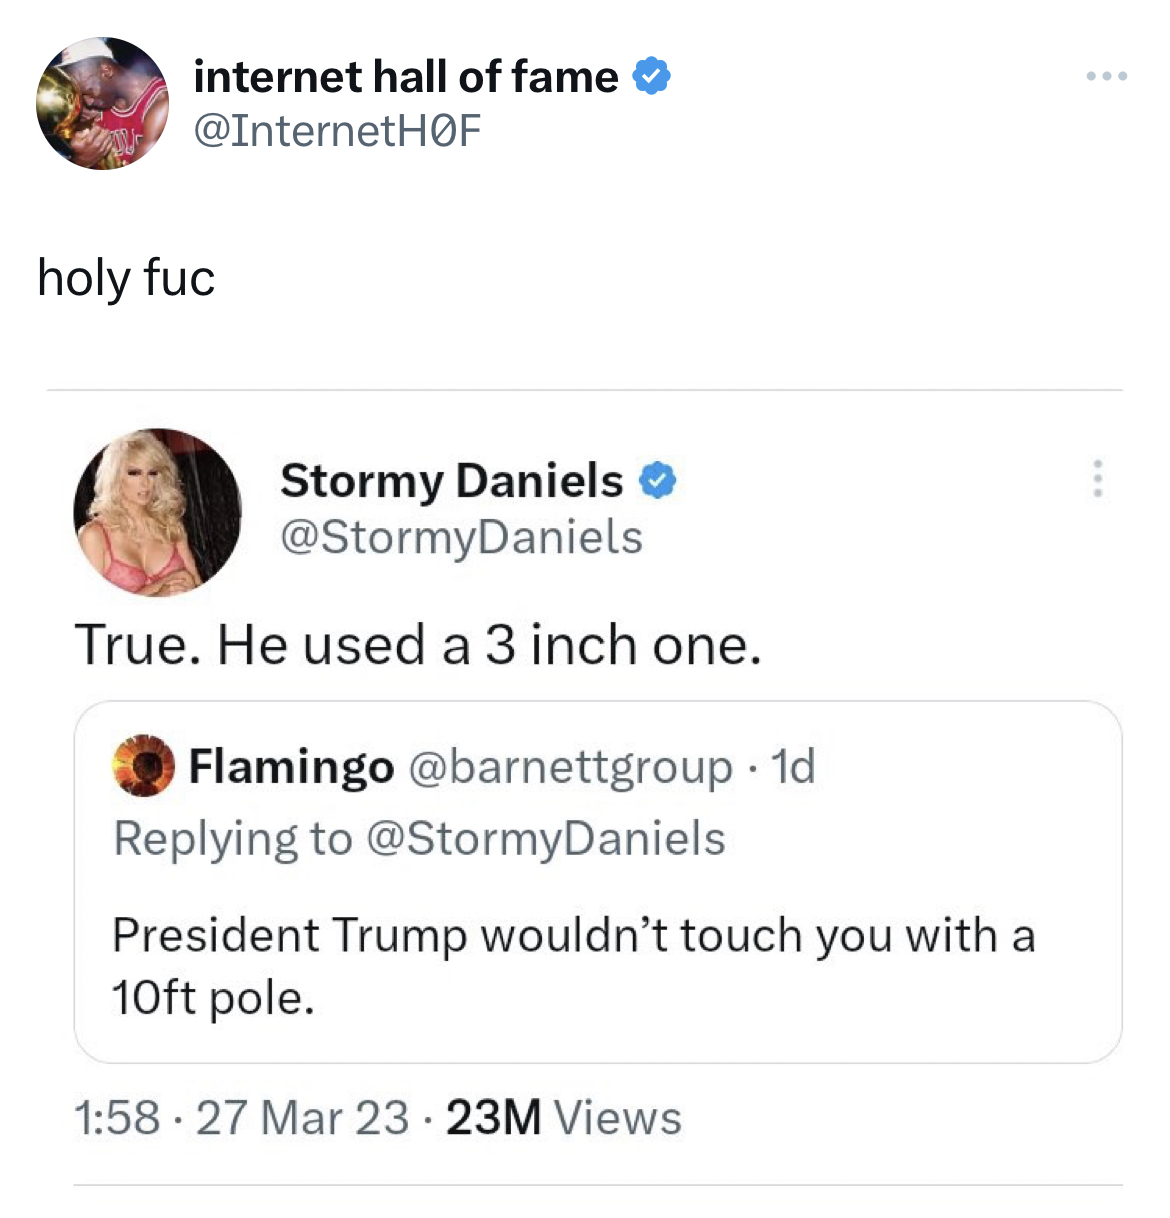 savage and absurd tweets - document - internet hall of fame F holy fuc Stormy Daniels Daniels True. He used a 3 inch one. Flamingo . 1d Daniels President Trump wouldn't touch you with a 10ft pole. 27 Mar 23 23M Views ....